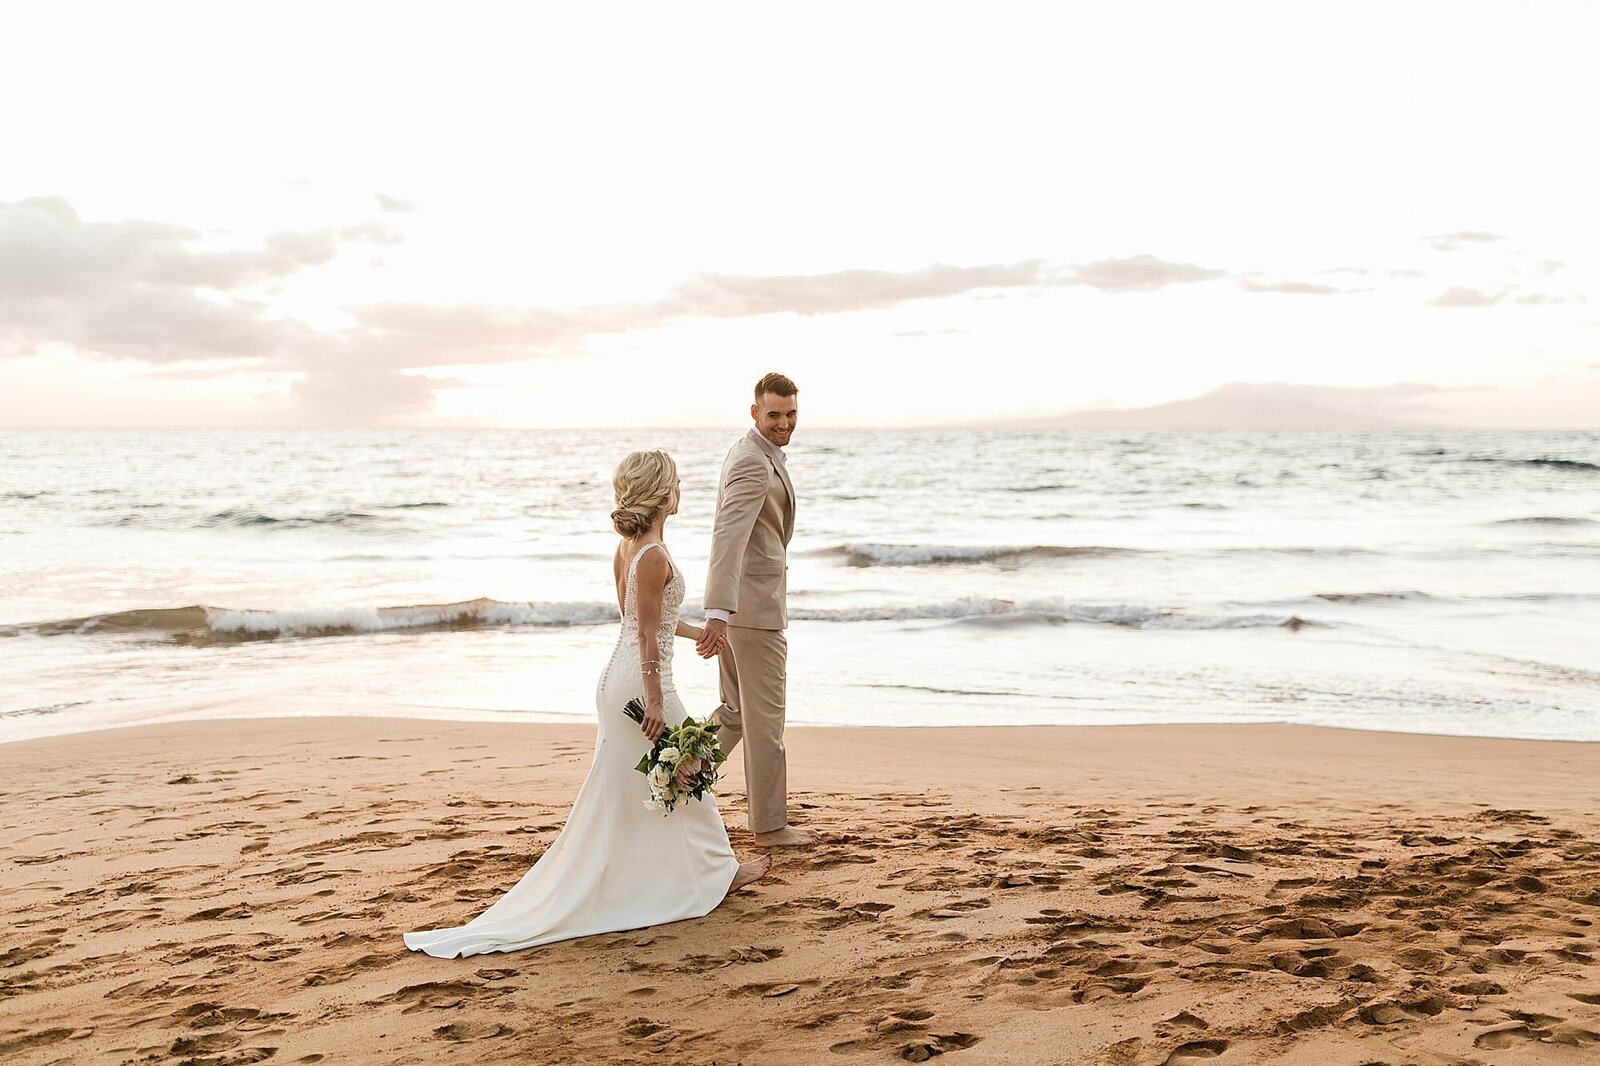 Hawaii Elopement Photography by Hazel & Lace